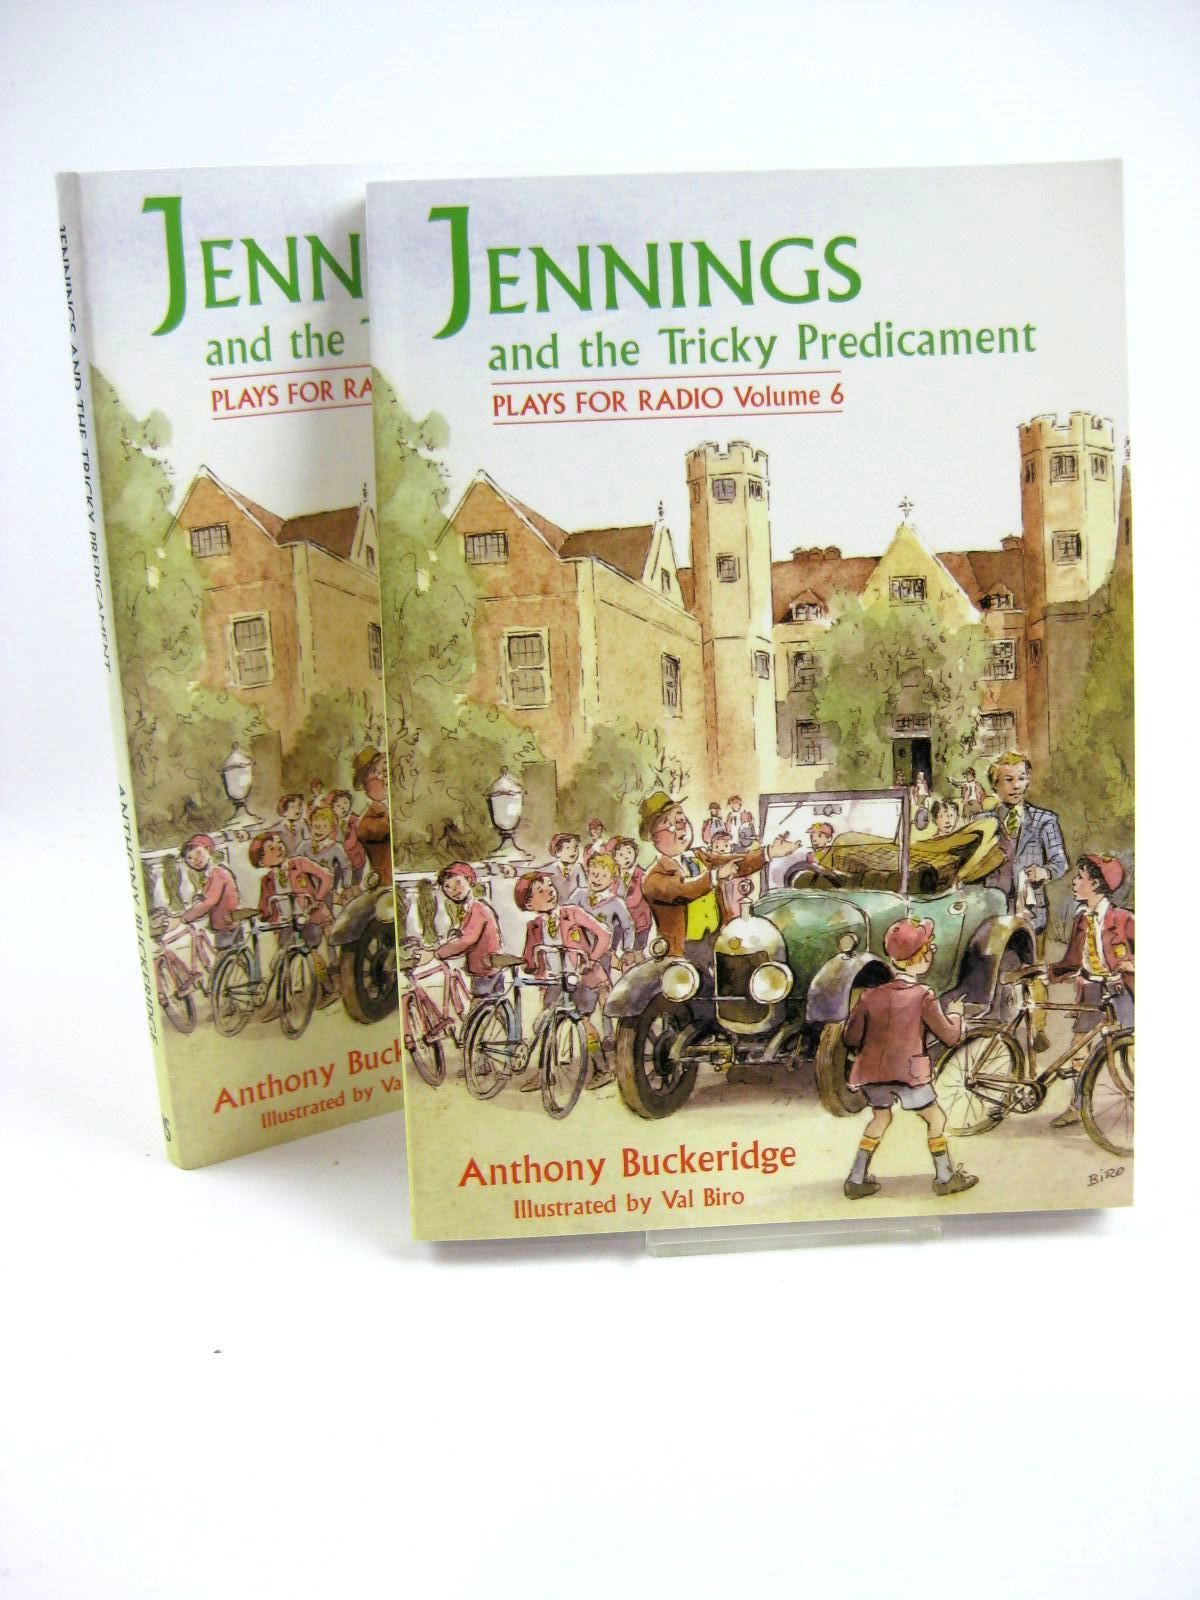 Cover of JENNINGS AND THE TRICKY PREDICAMENT by Anthony Buckeridge